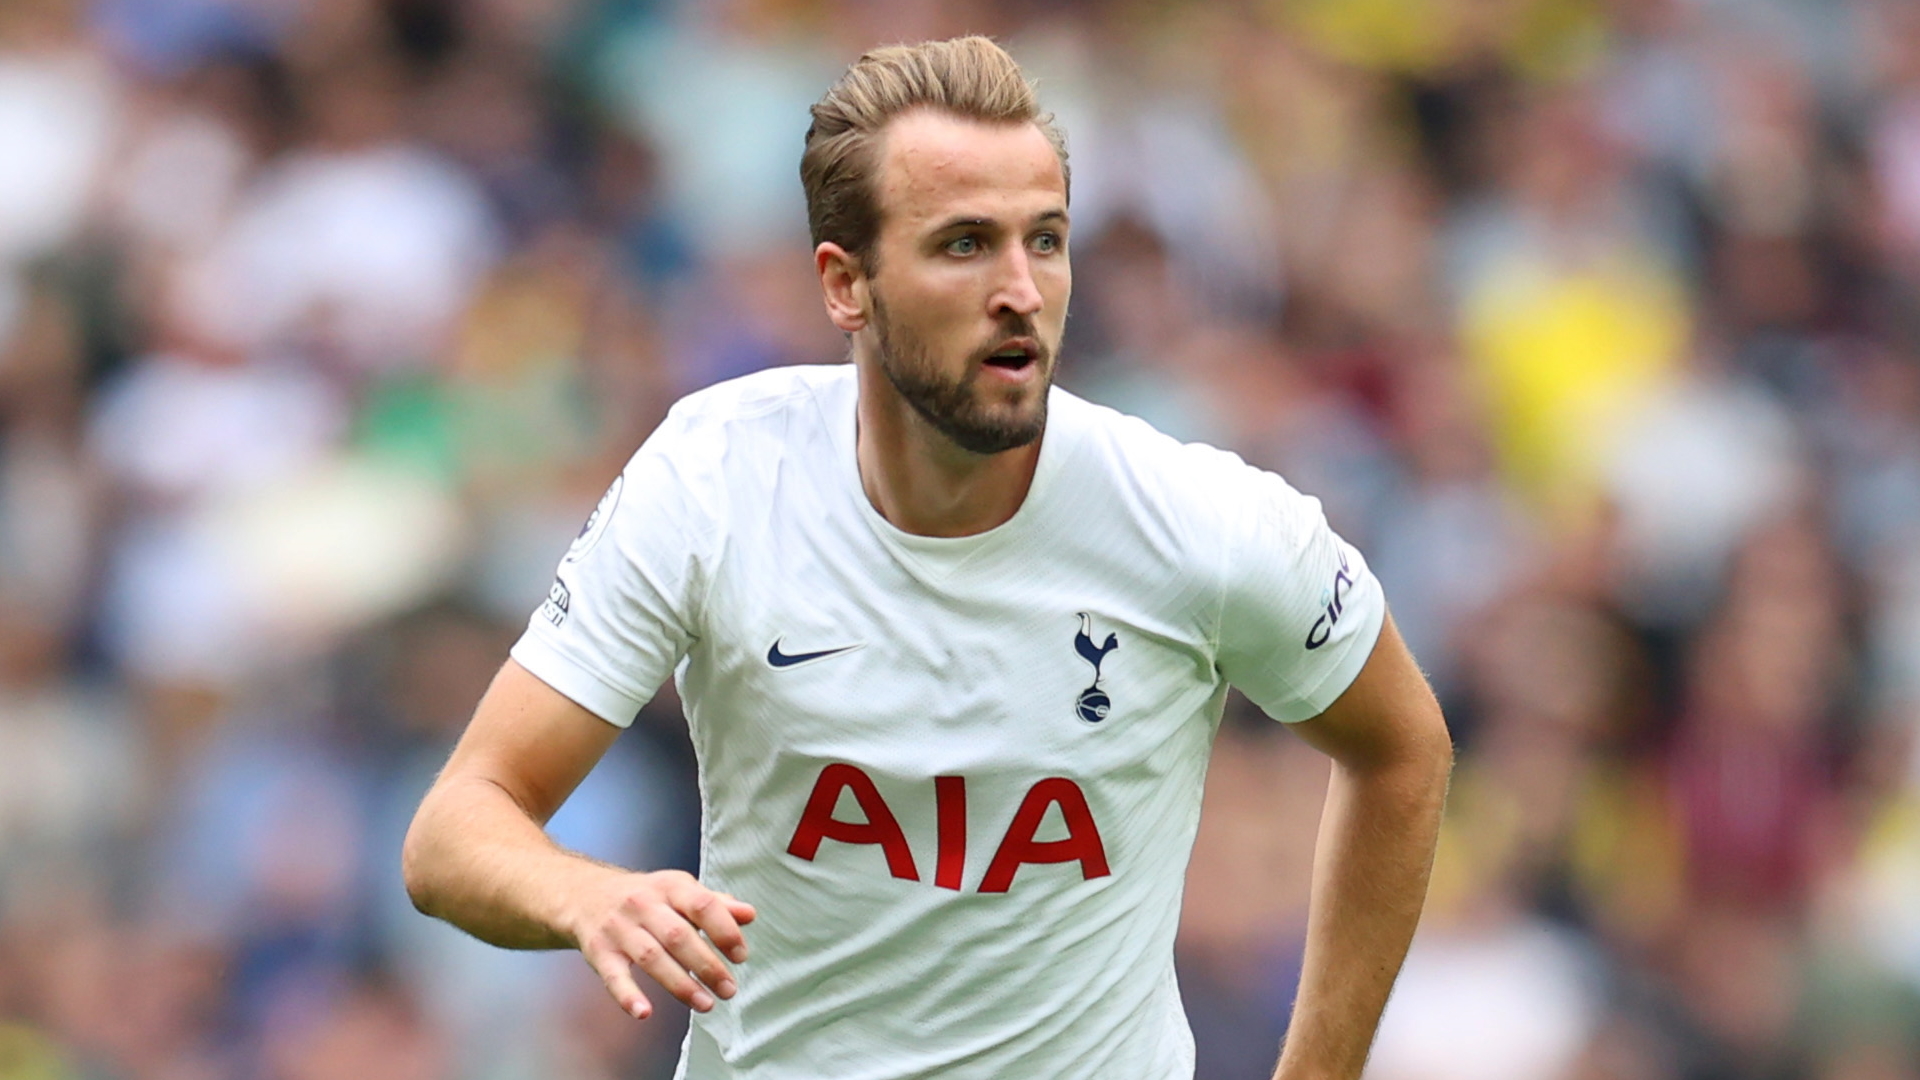 Transfer news and rumours LIVE: Kane open to Tottenham extension